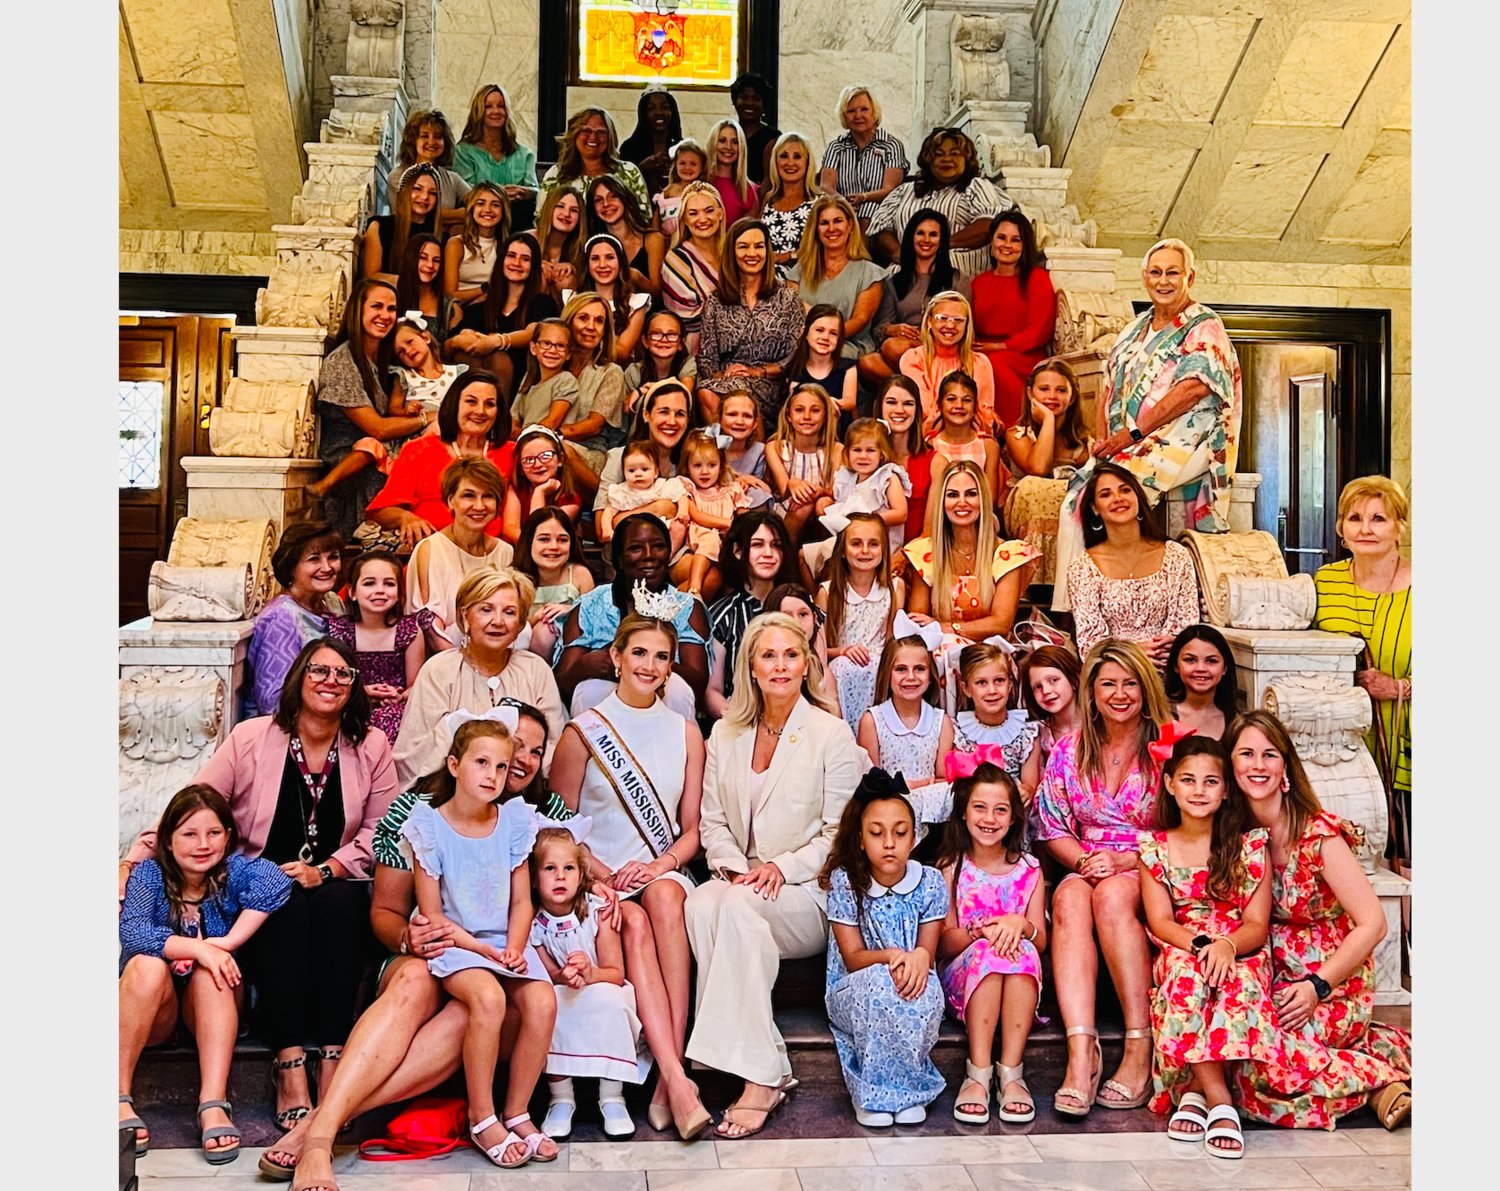 Miss Mississippi Volunteer, Rachel Shumaker, was the special guest speaker of Representative Jill Ford’s Girls’ Day at The Capitol on June 17th. Girl’s Day is something that Representative Ford started her first year in the Legislature when she invited young ladies from Madison County to tour their State Capitol and learn about legislation.  Her passion is to build a desire in these young ladies to one day serve their state by running for public office. The First Lady Elee Reeves also hosted a tour of the Governor’s Mansion with a special dessert for the girls.